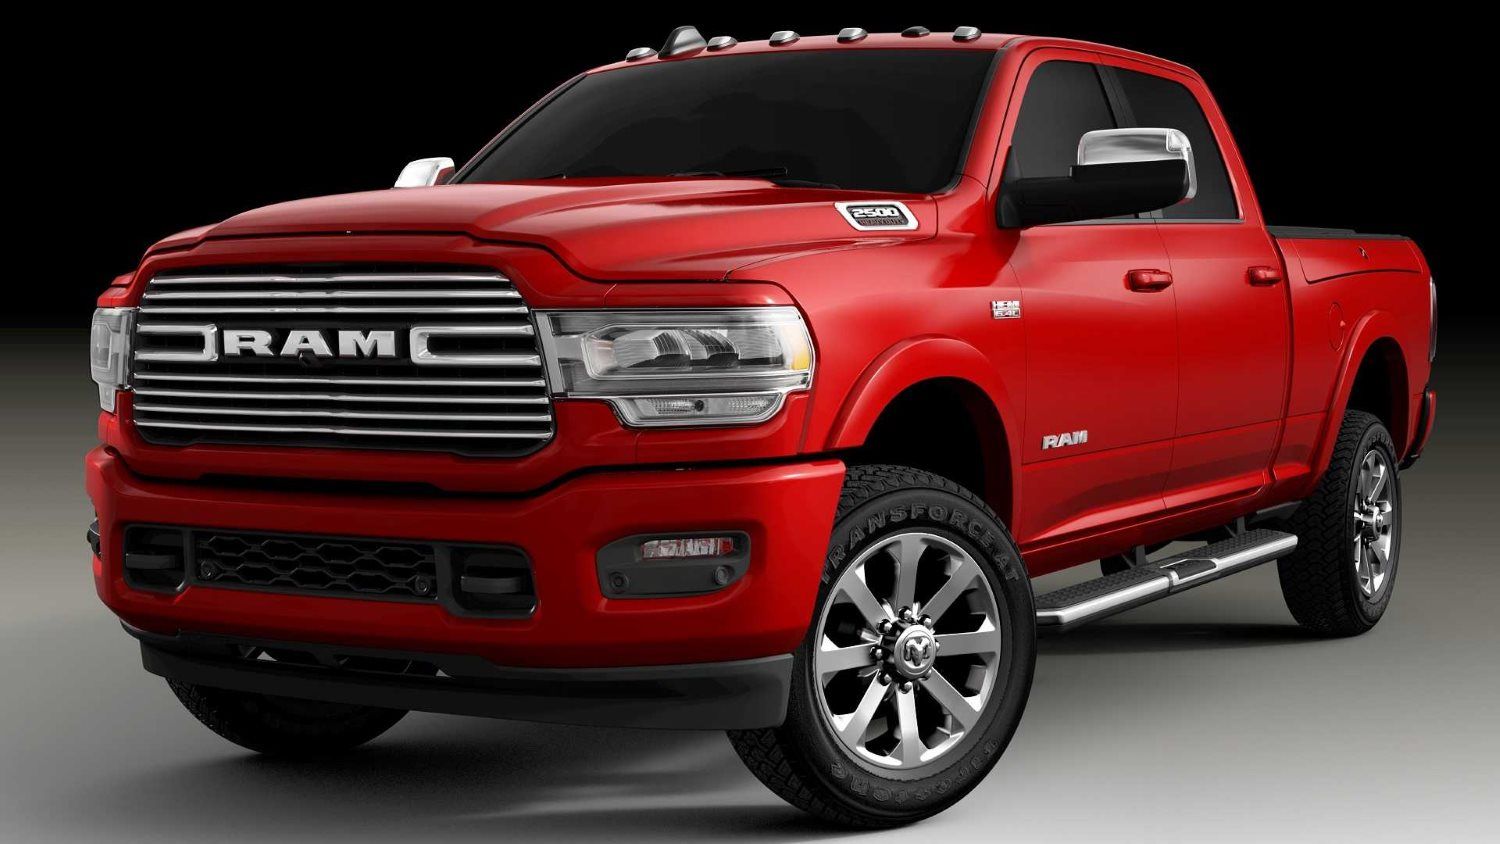 Ram Introduces Sport Pack Visual Upgrades To HD Pickups